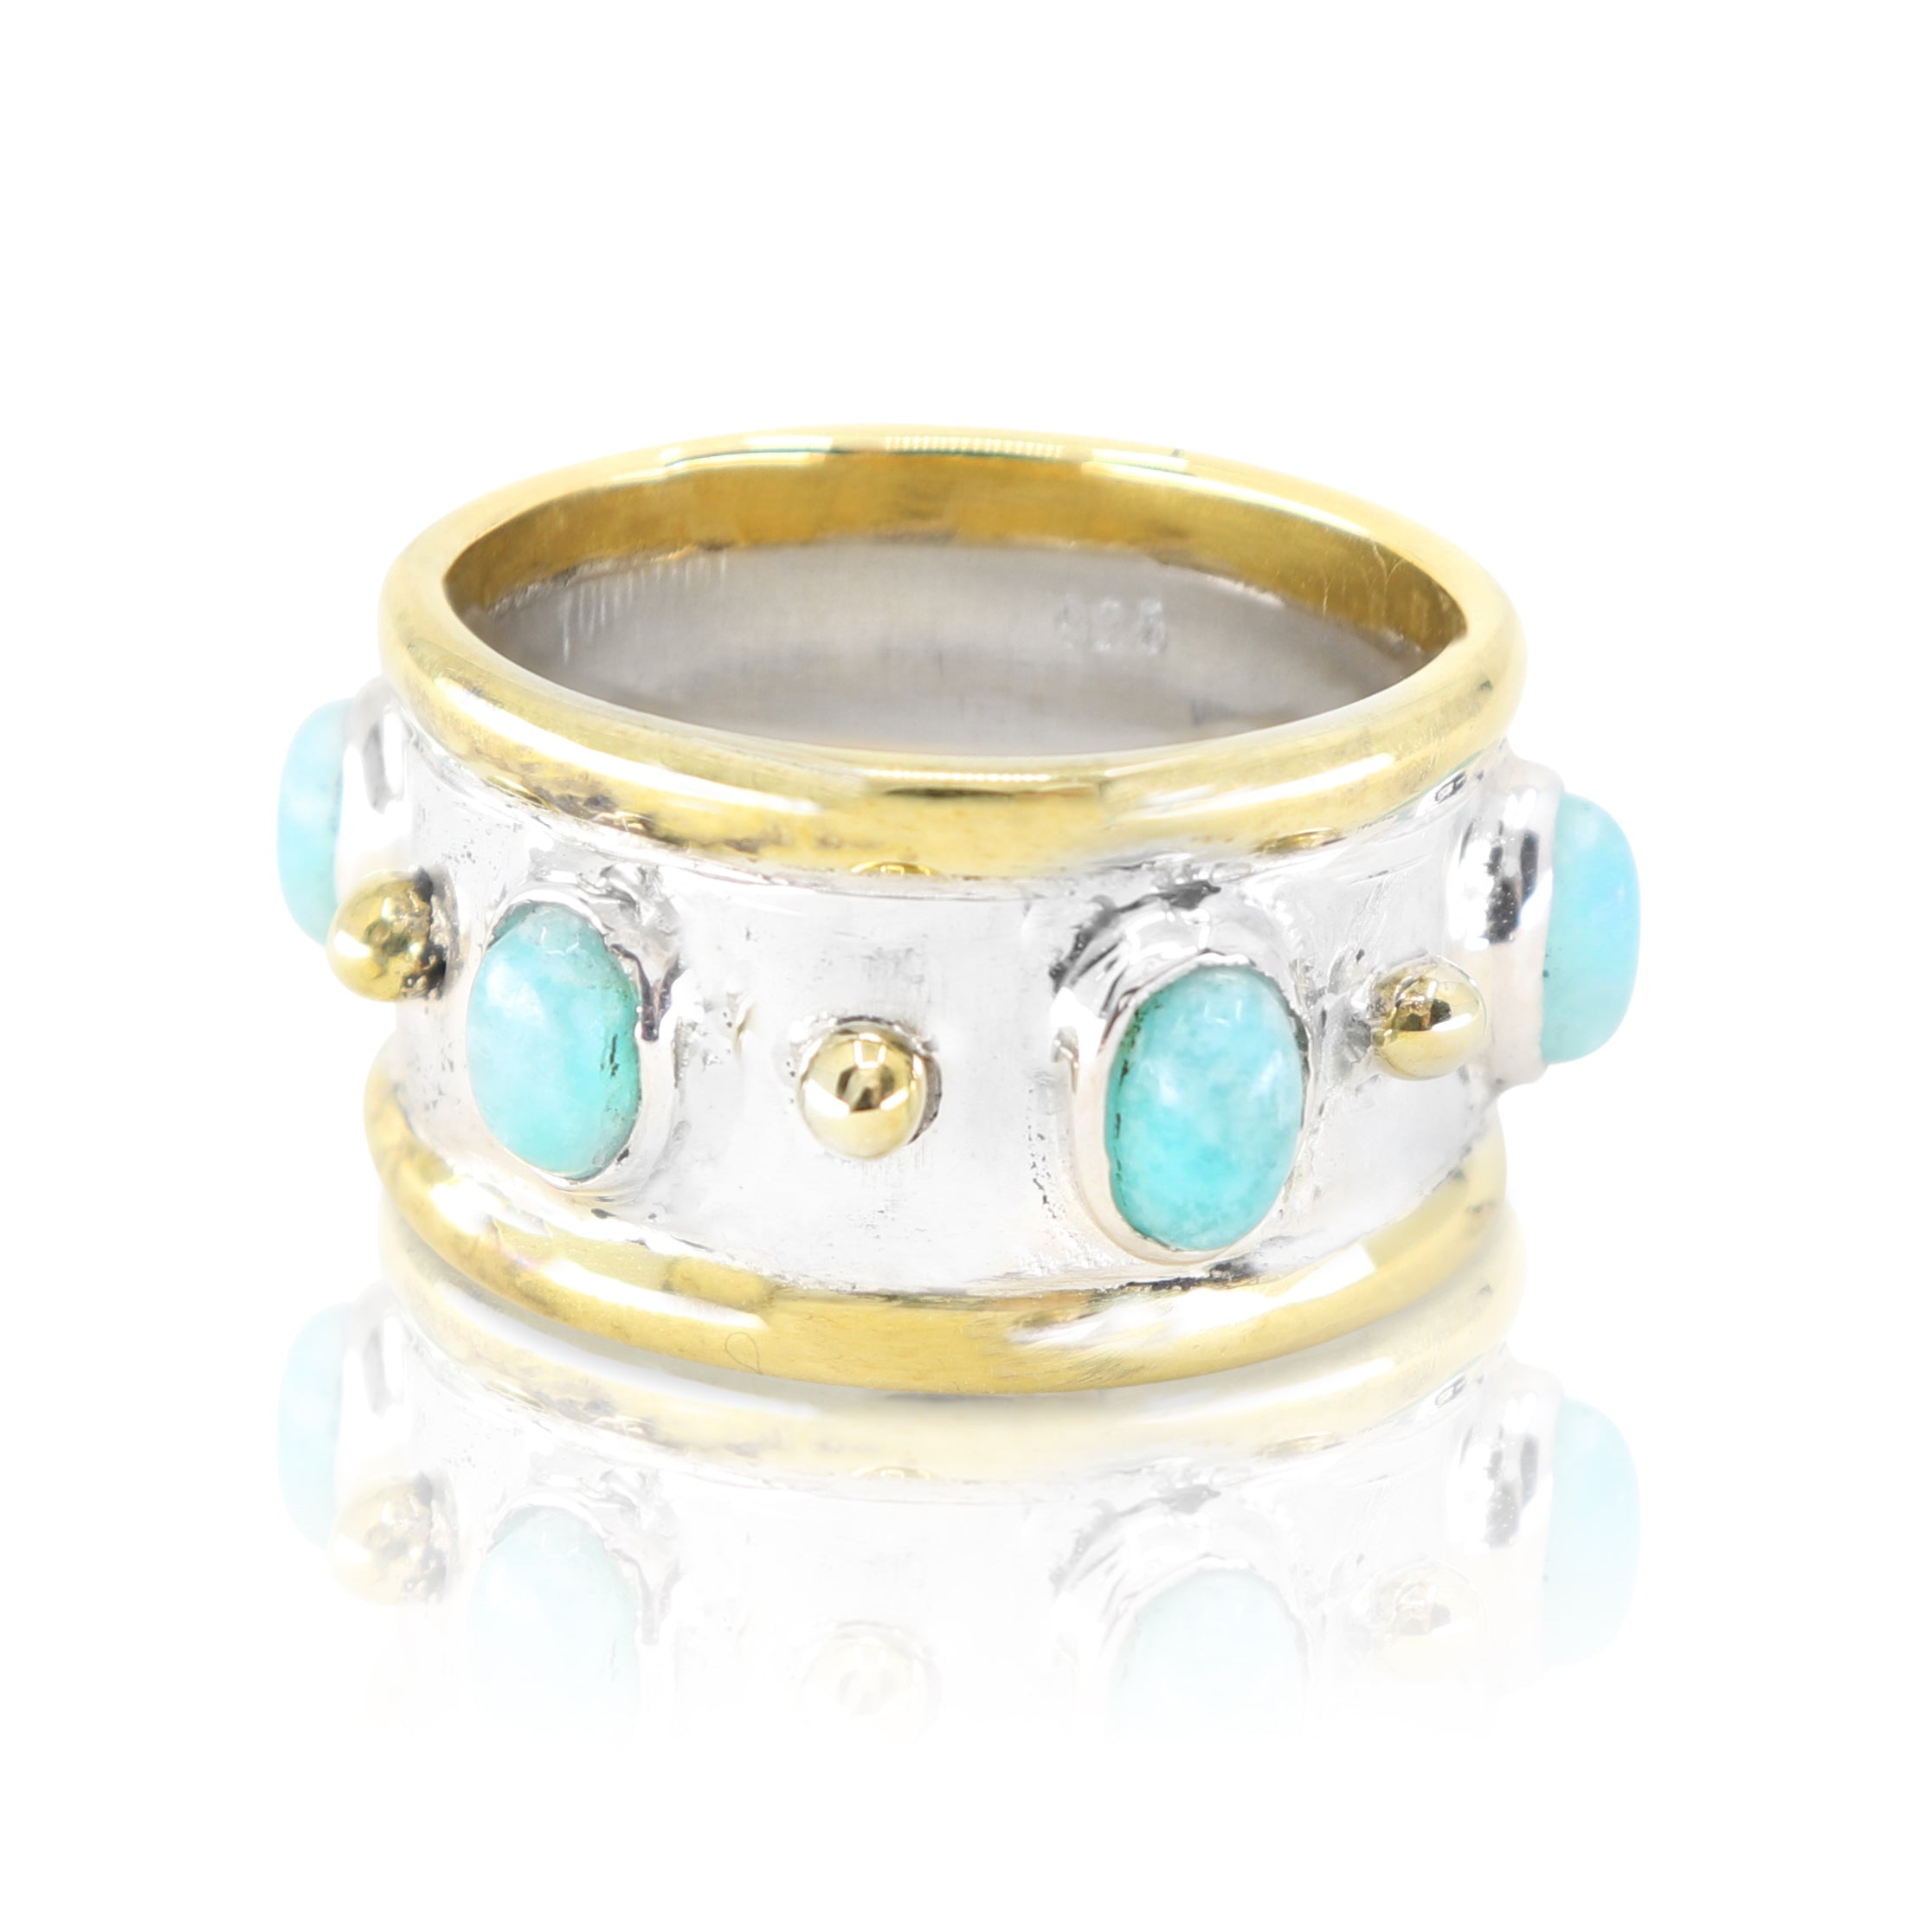 The Imperial Amazonite Ring